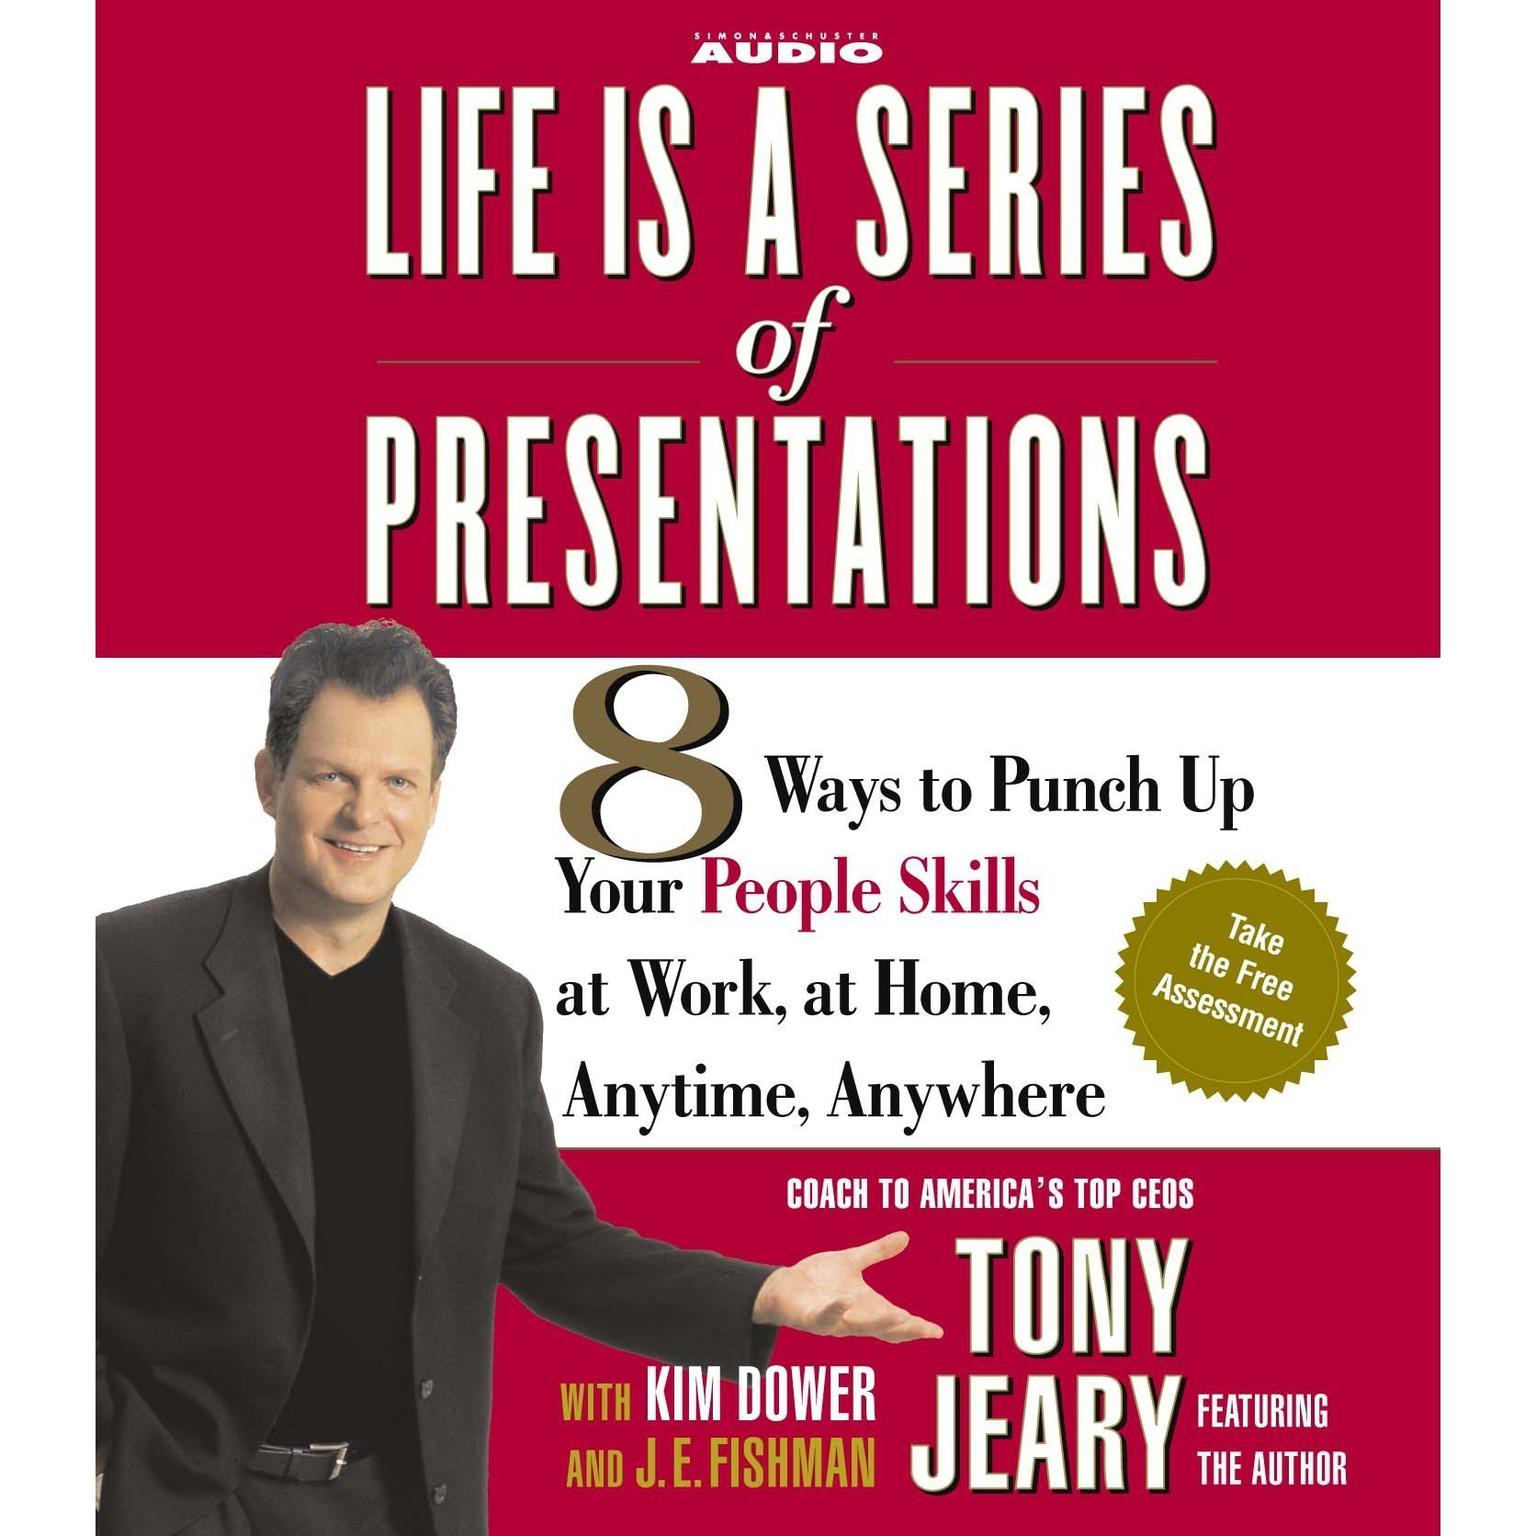 Life Is a Series of Presentations (Abridged): 8 Ways to Punch Up Your People Skills at Work, at Home, Anytime, Anywhere Audiobook, by Tony Jeary